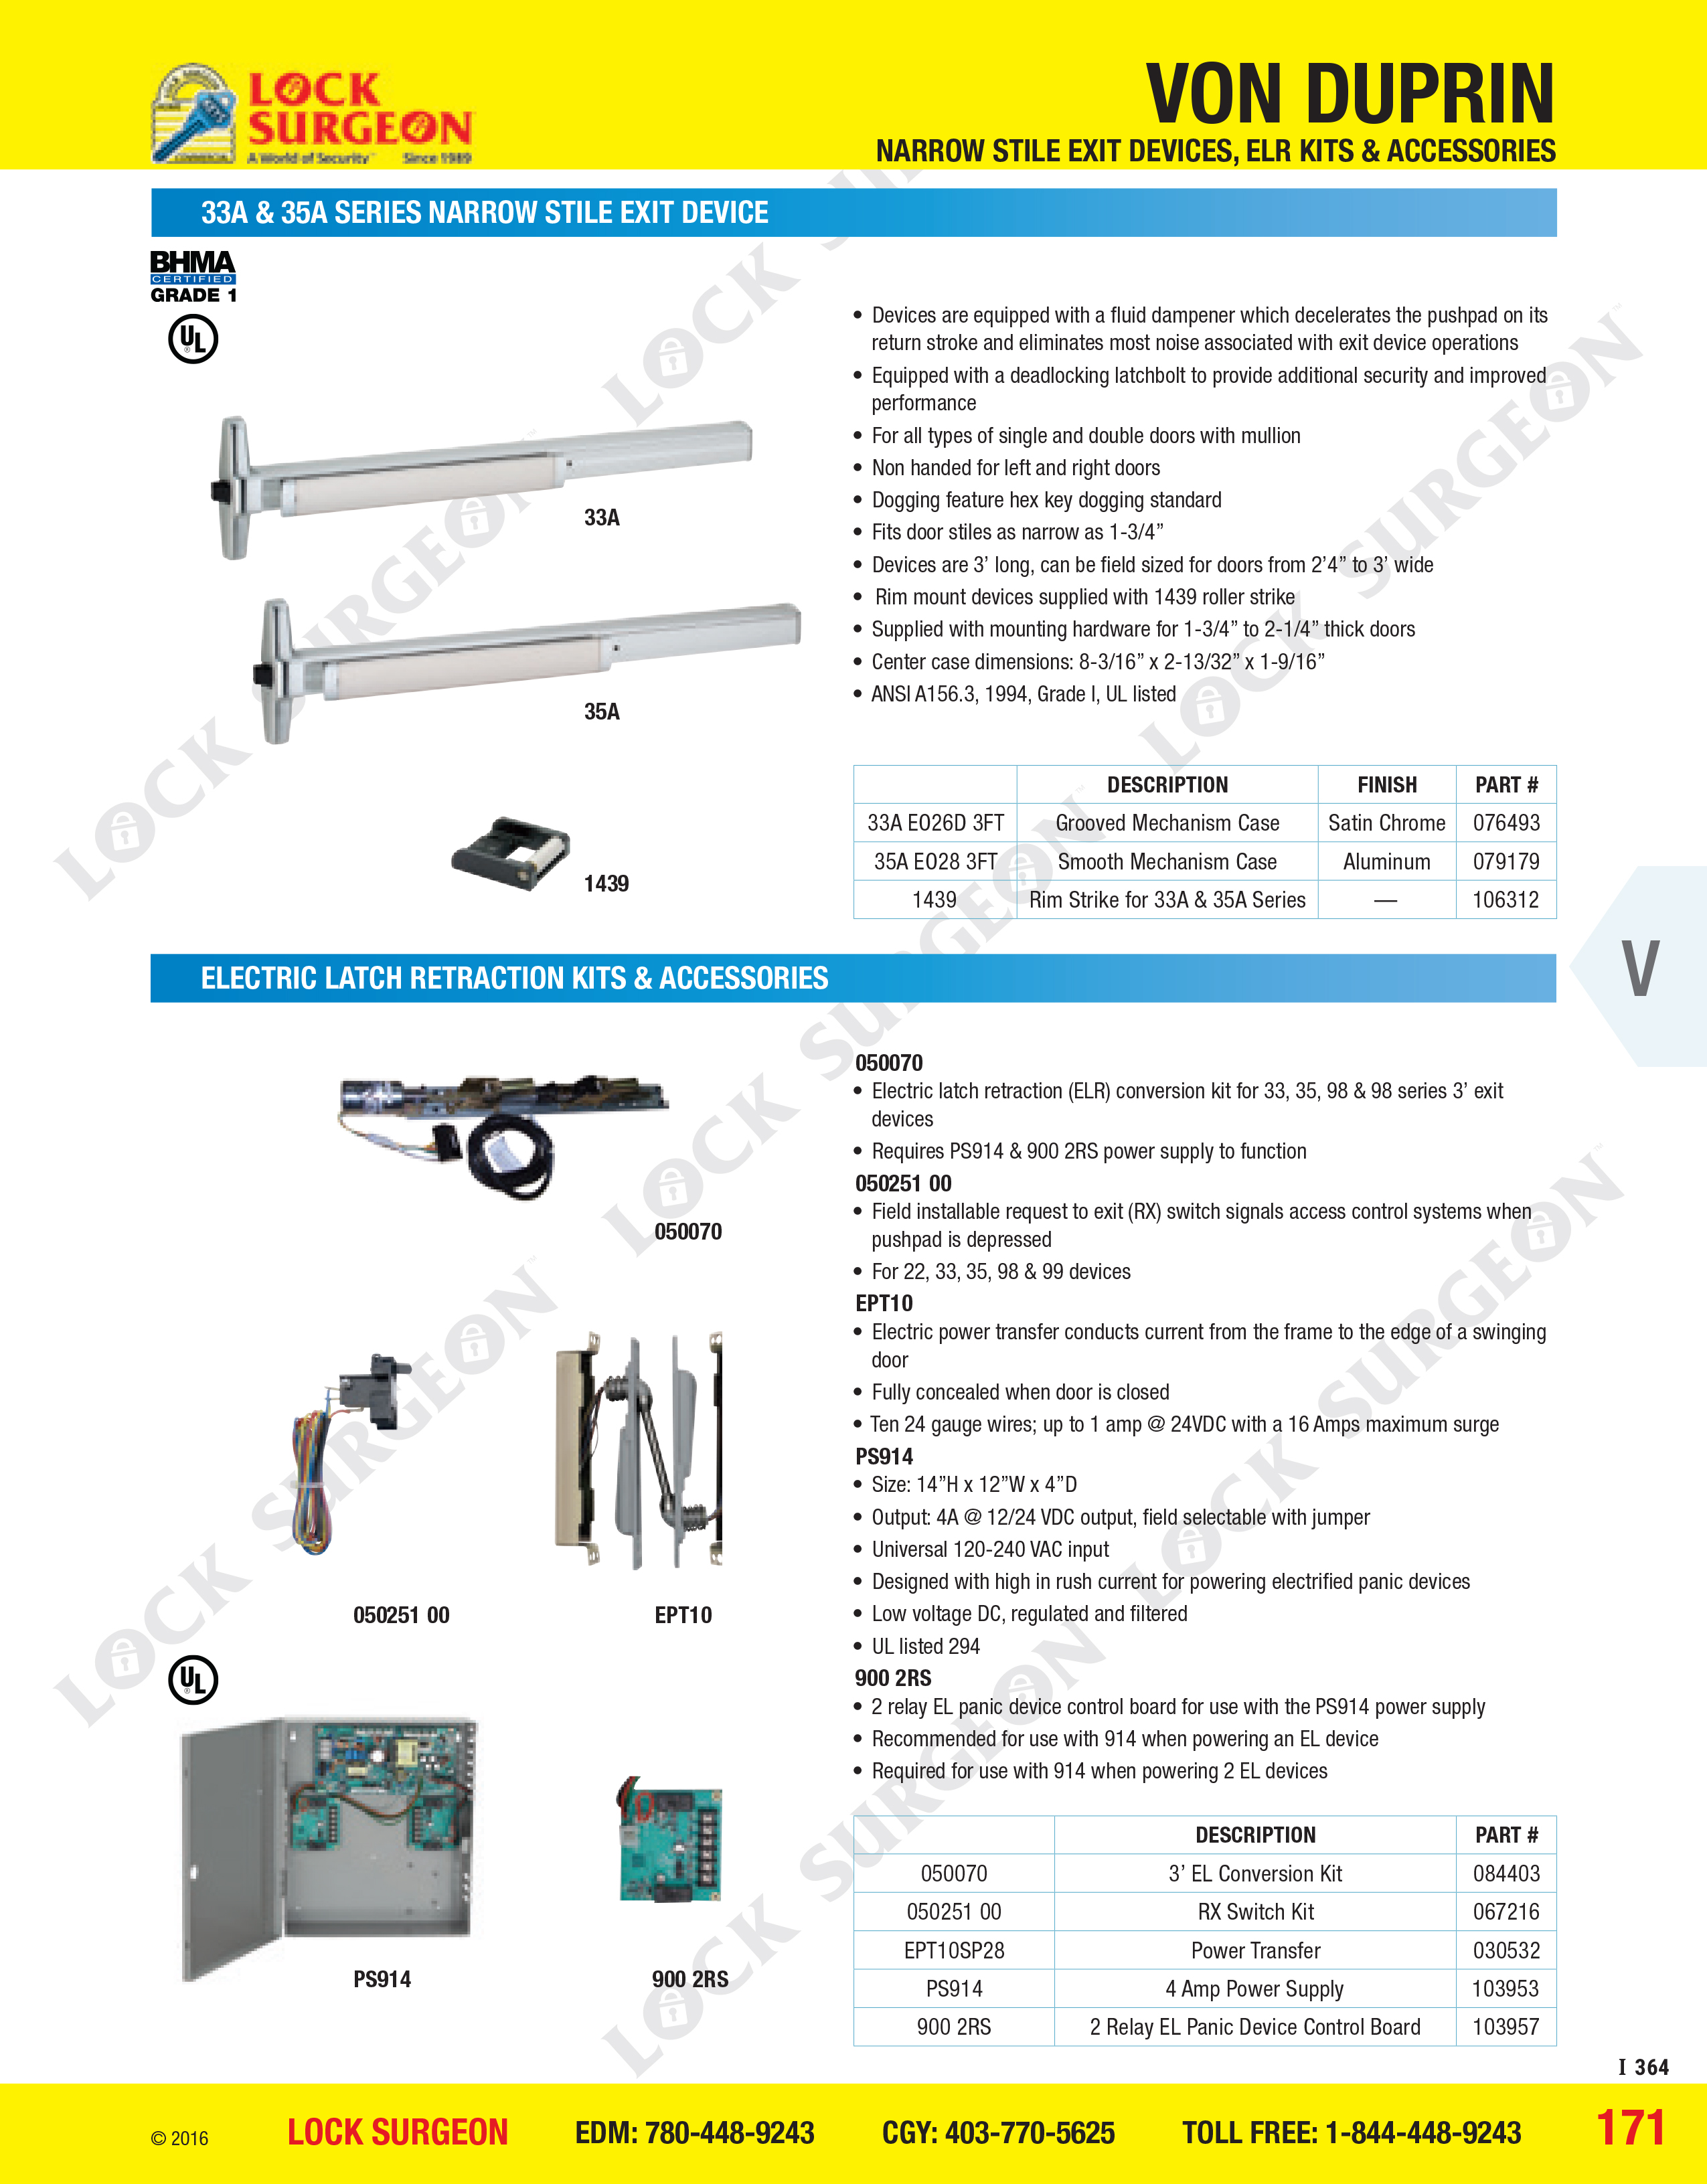 Von Duprin narrow stile exit devices electronic latch retraction kits and accessories Acheson.